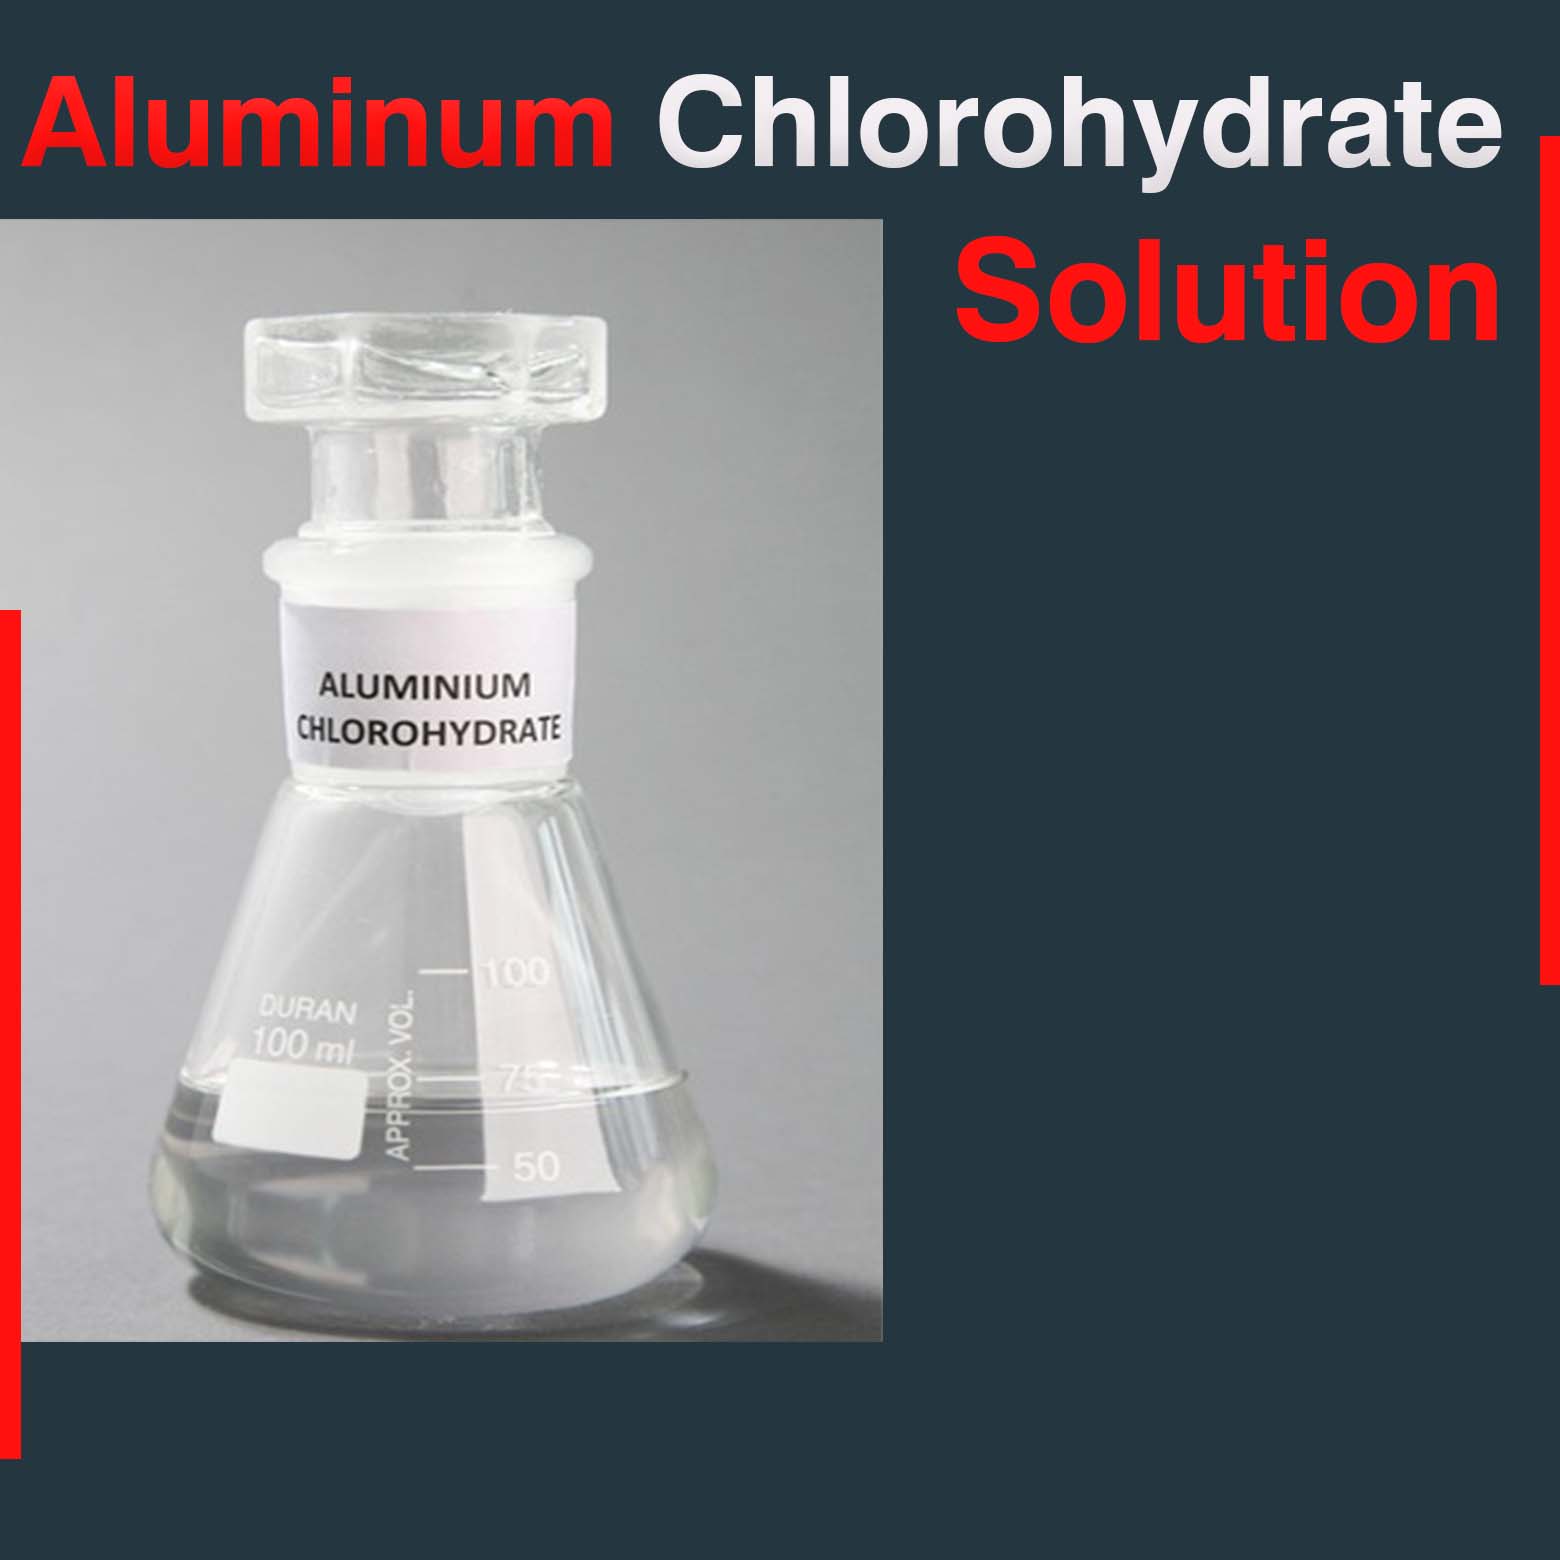 Aluminum Chlorohydrate Solution In Portugal